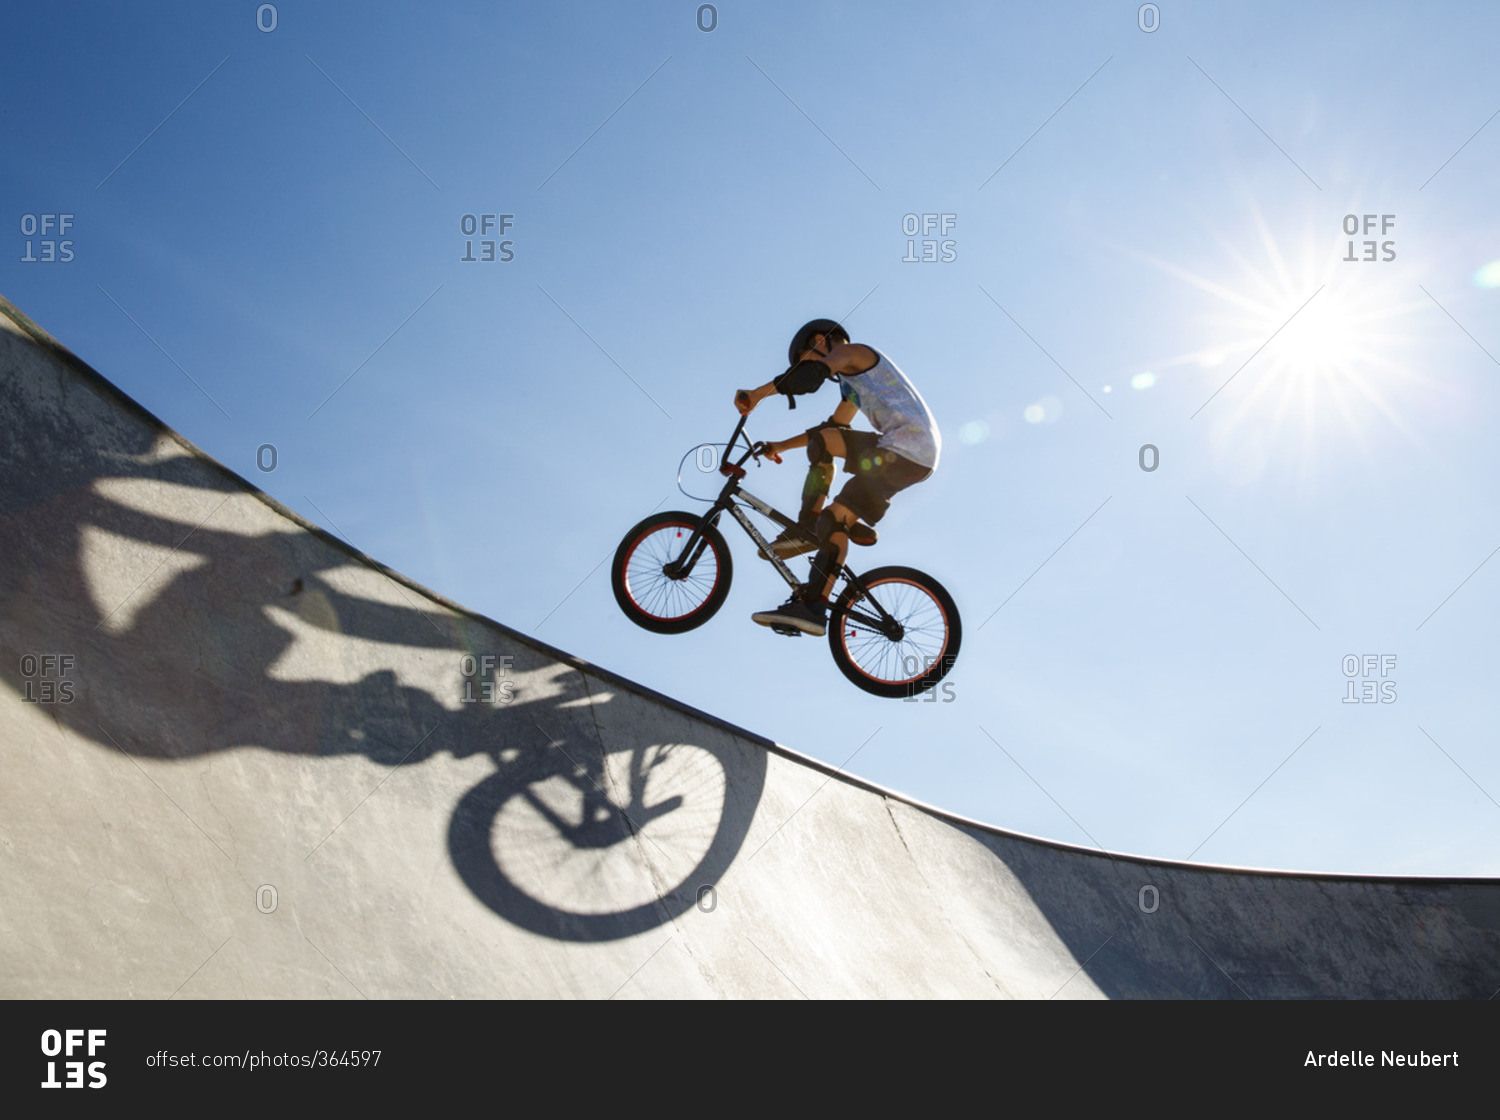 A young boy in mid-air doing a stunt on a bike